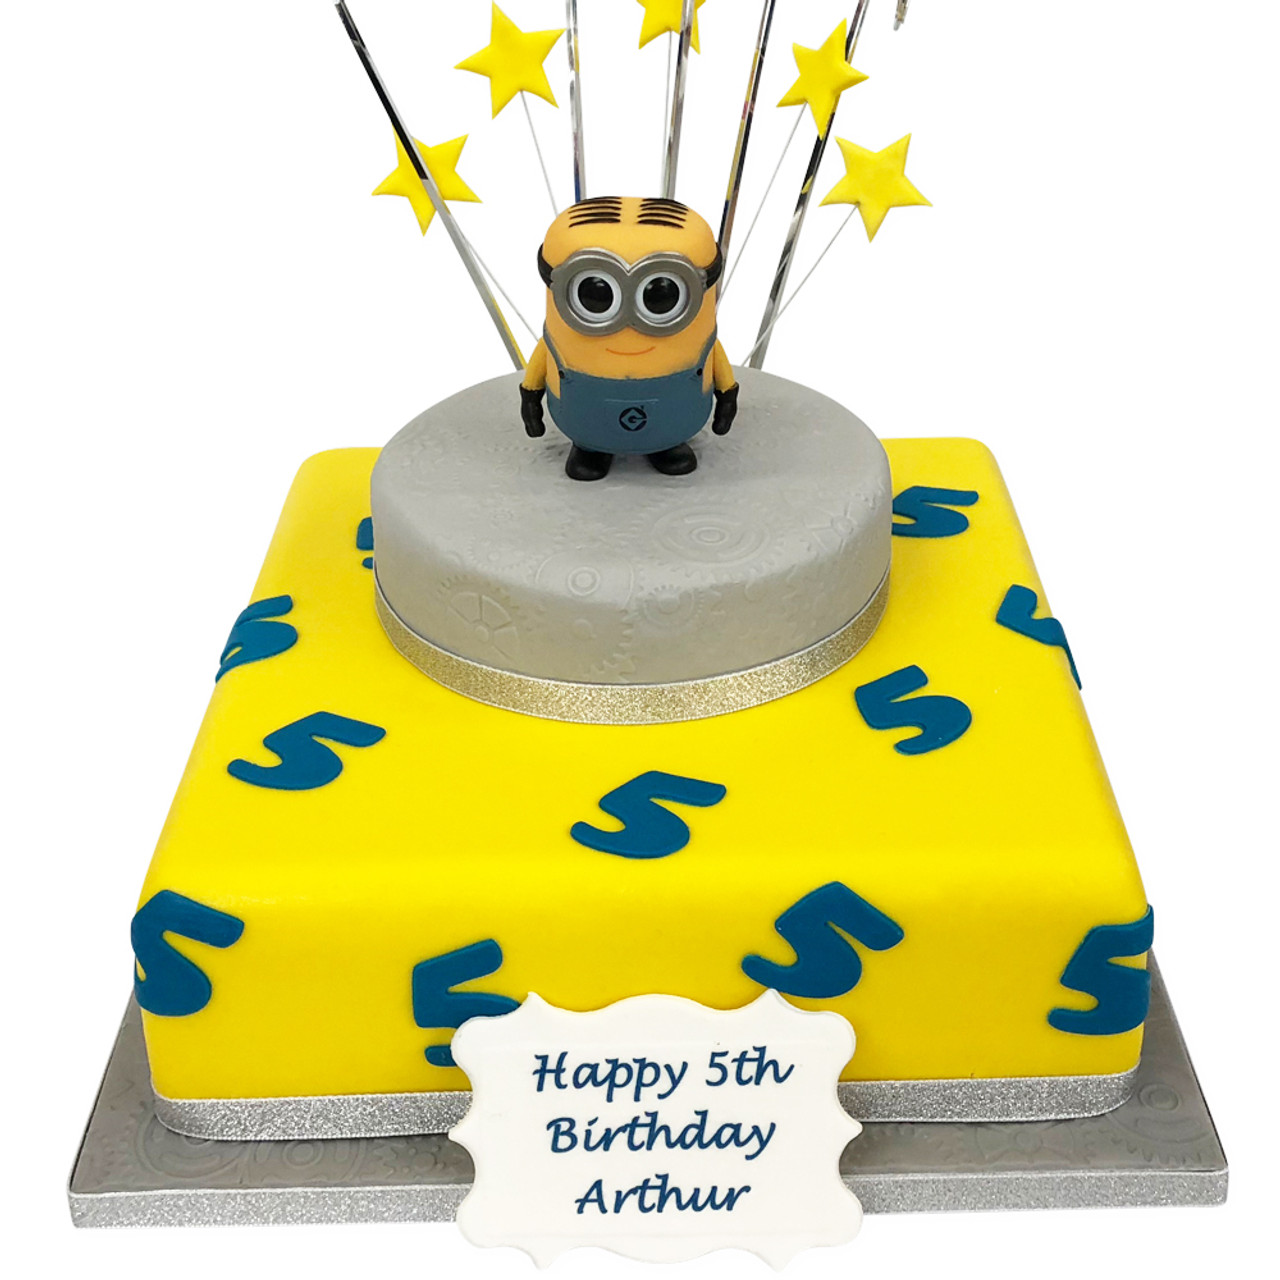 Making a Minion Cake {Beyond the Oven} - A Classic Twist